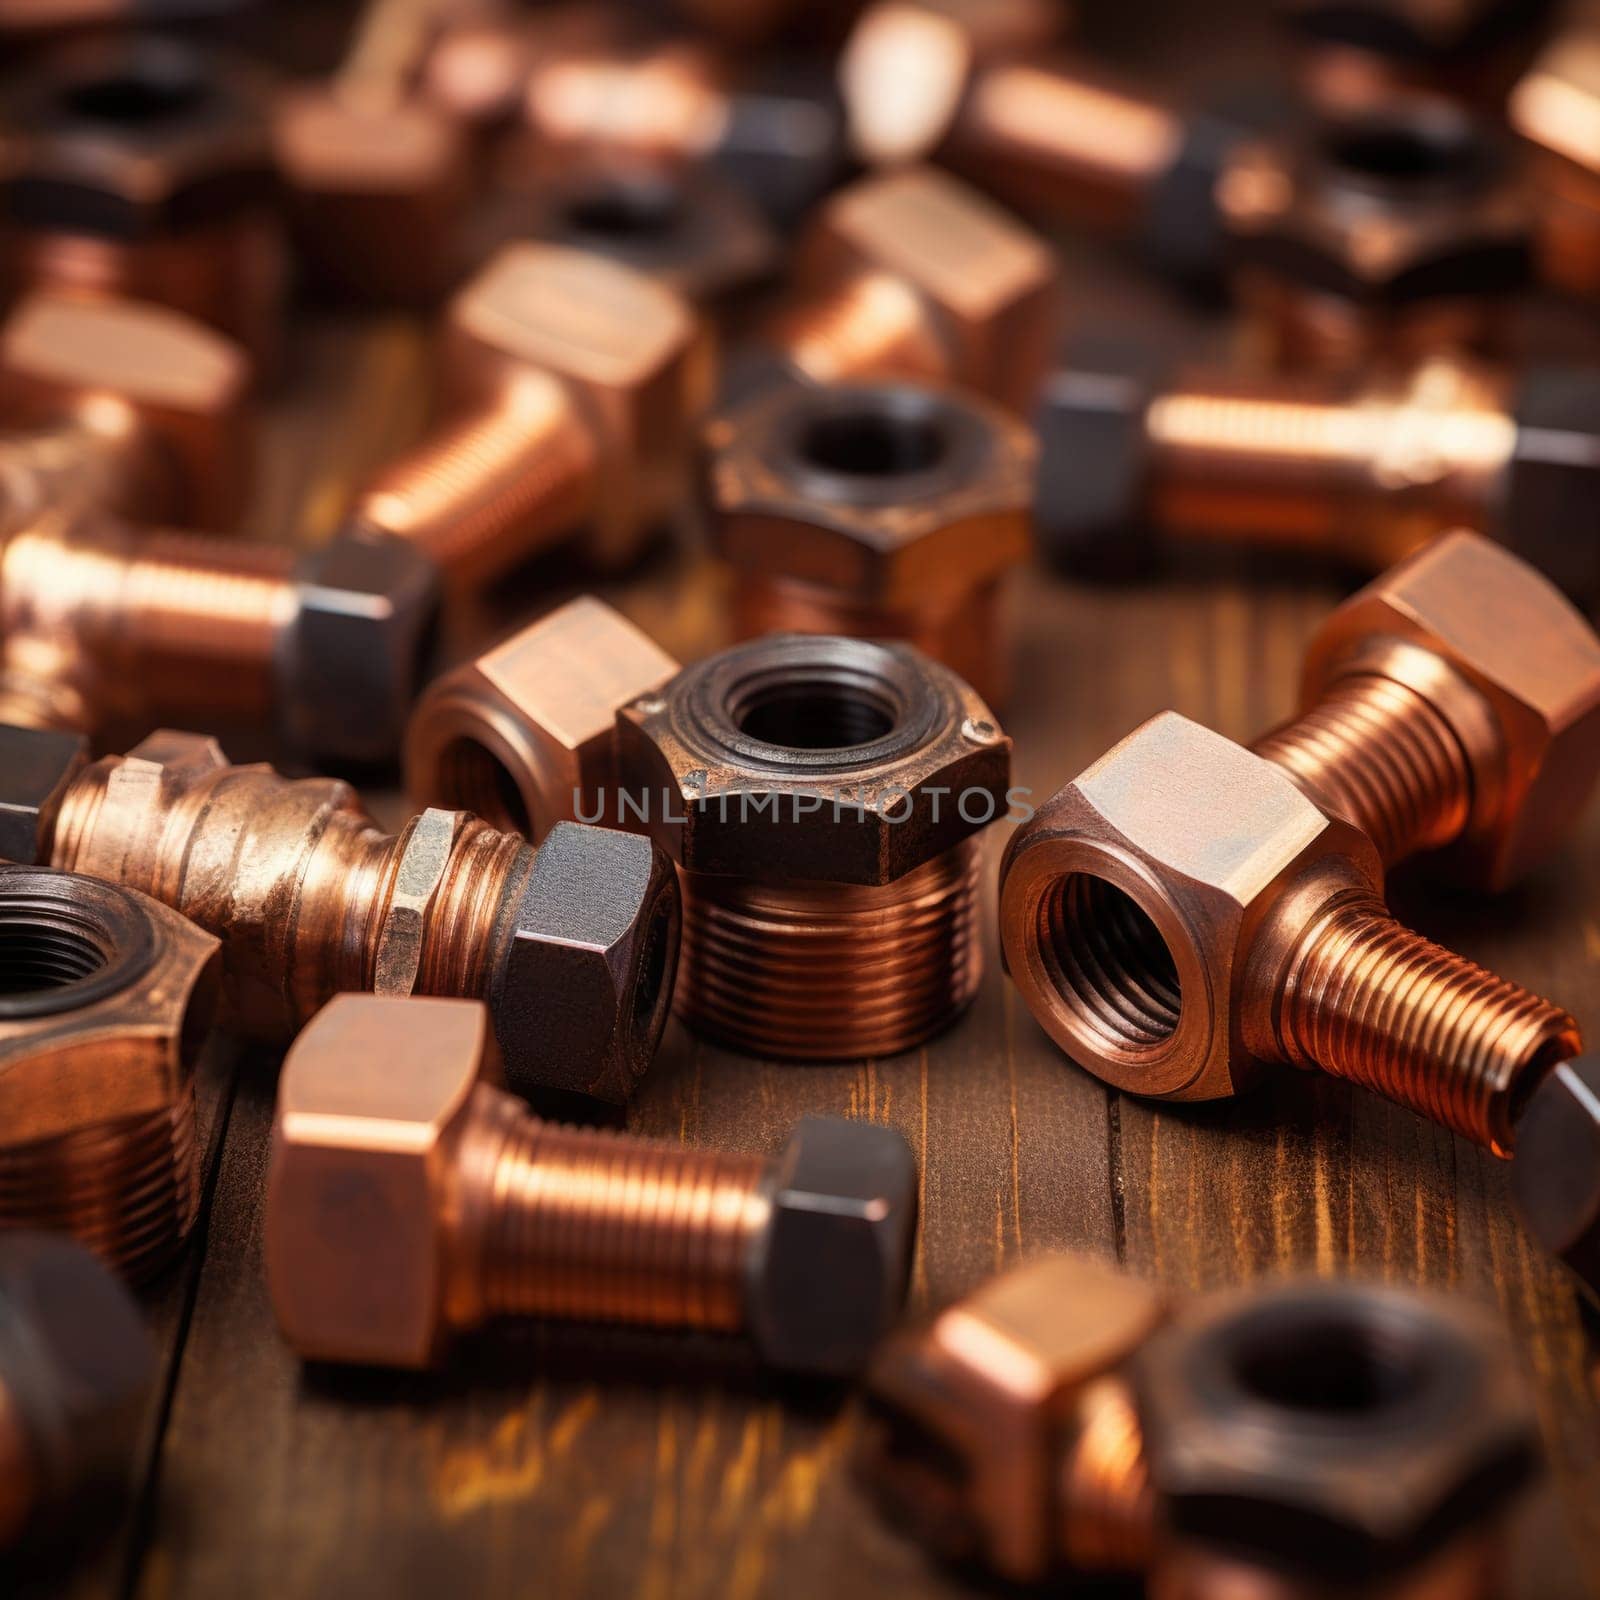 Copper pipe fittings on wooden table